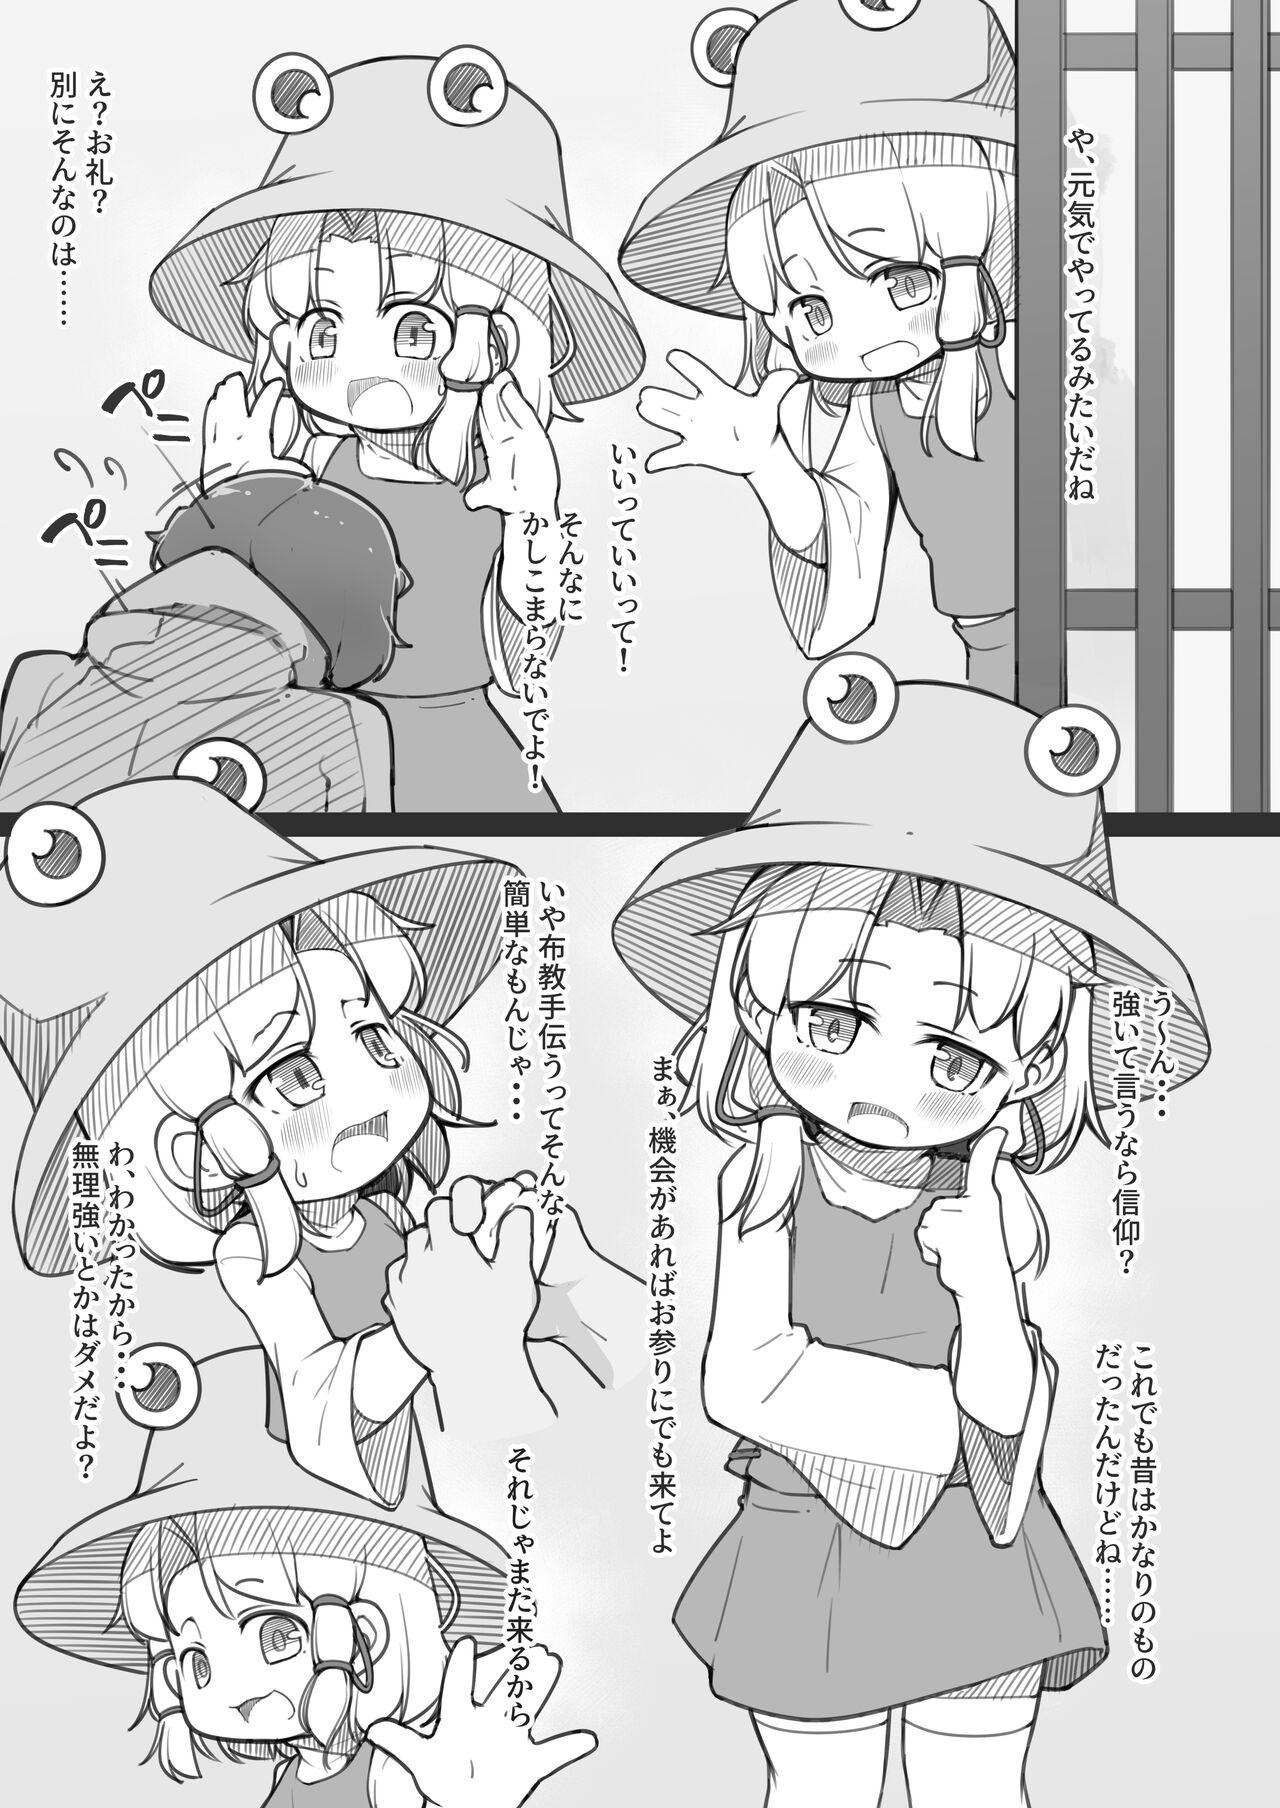 Hot Girl Porn 幻想入りしたカリスマ教祖に諏訪子さまが祀り上げられる話 - Touhou project Outside - Page 4